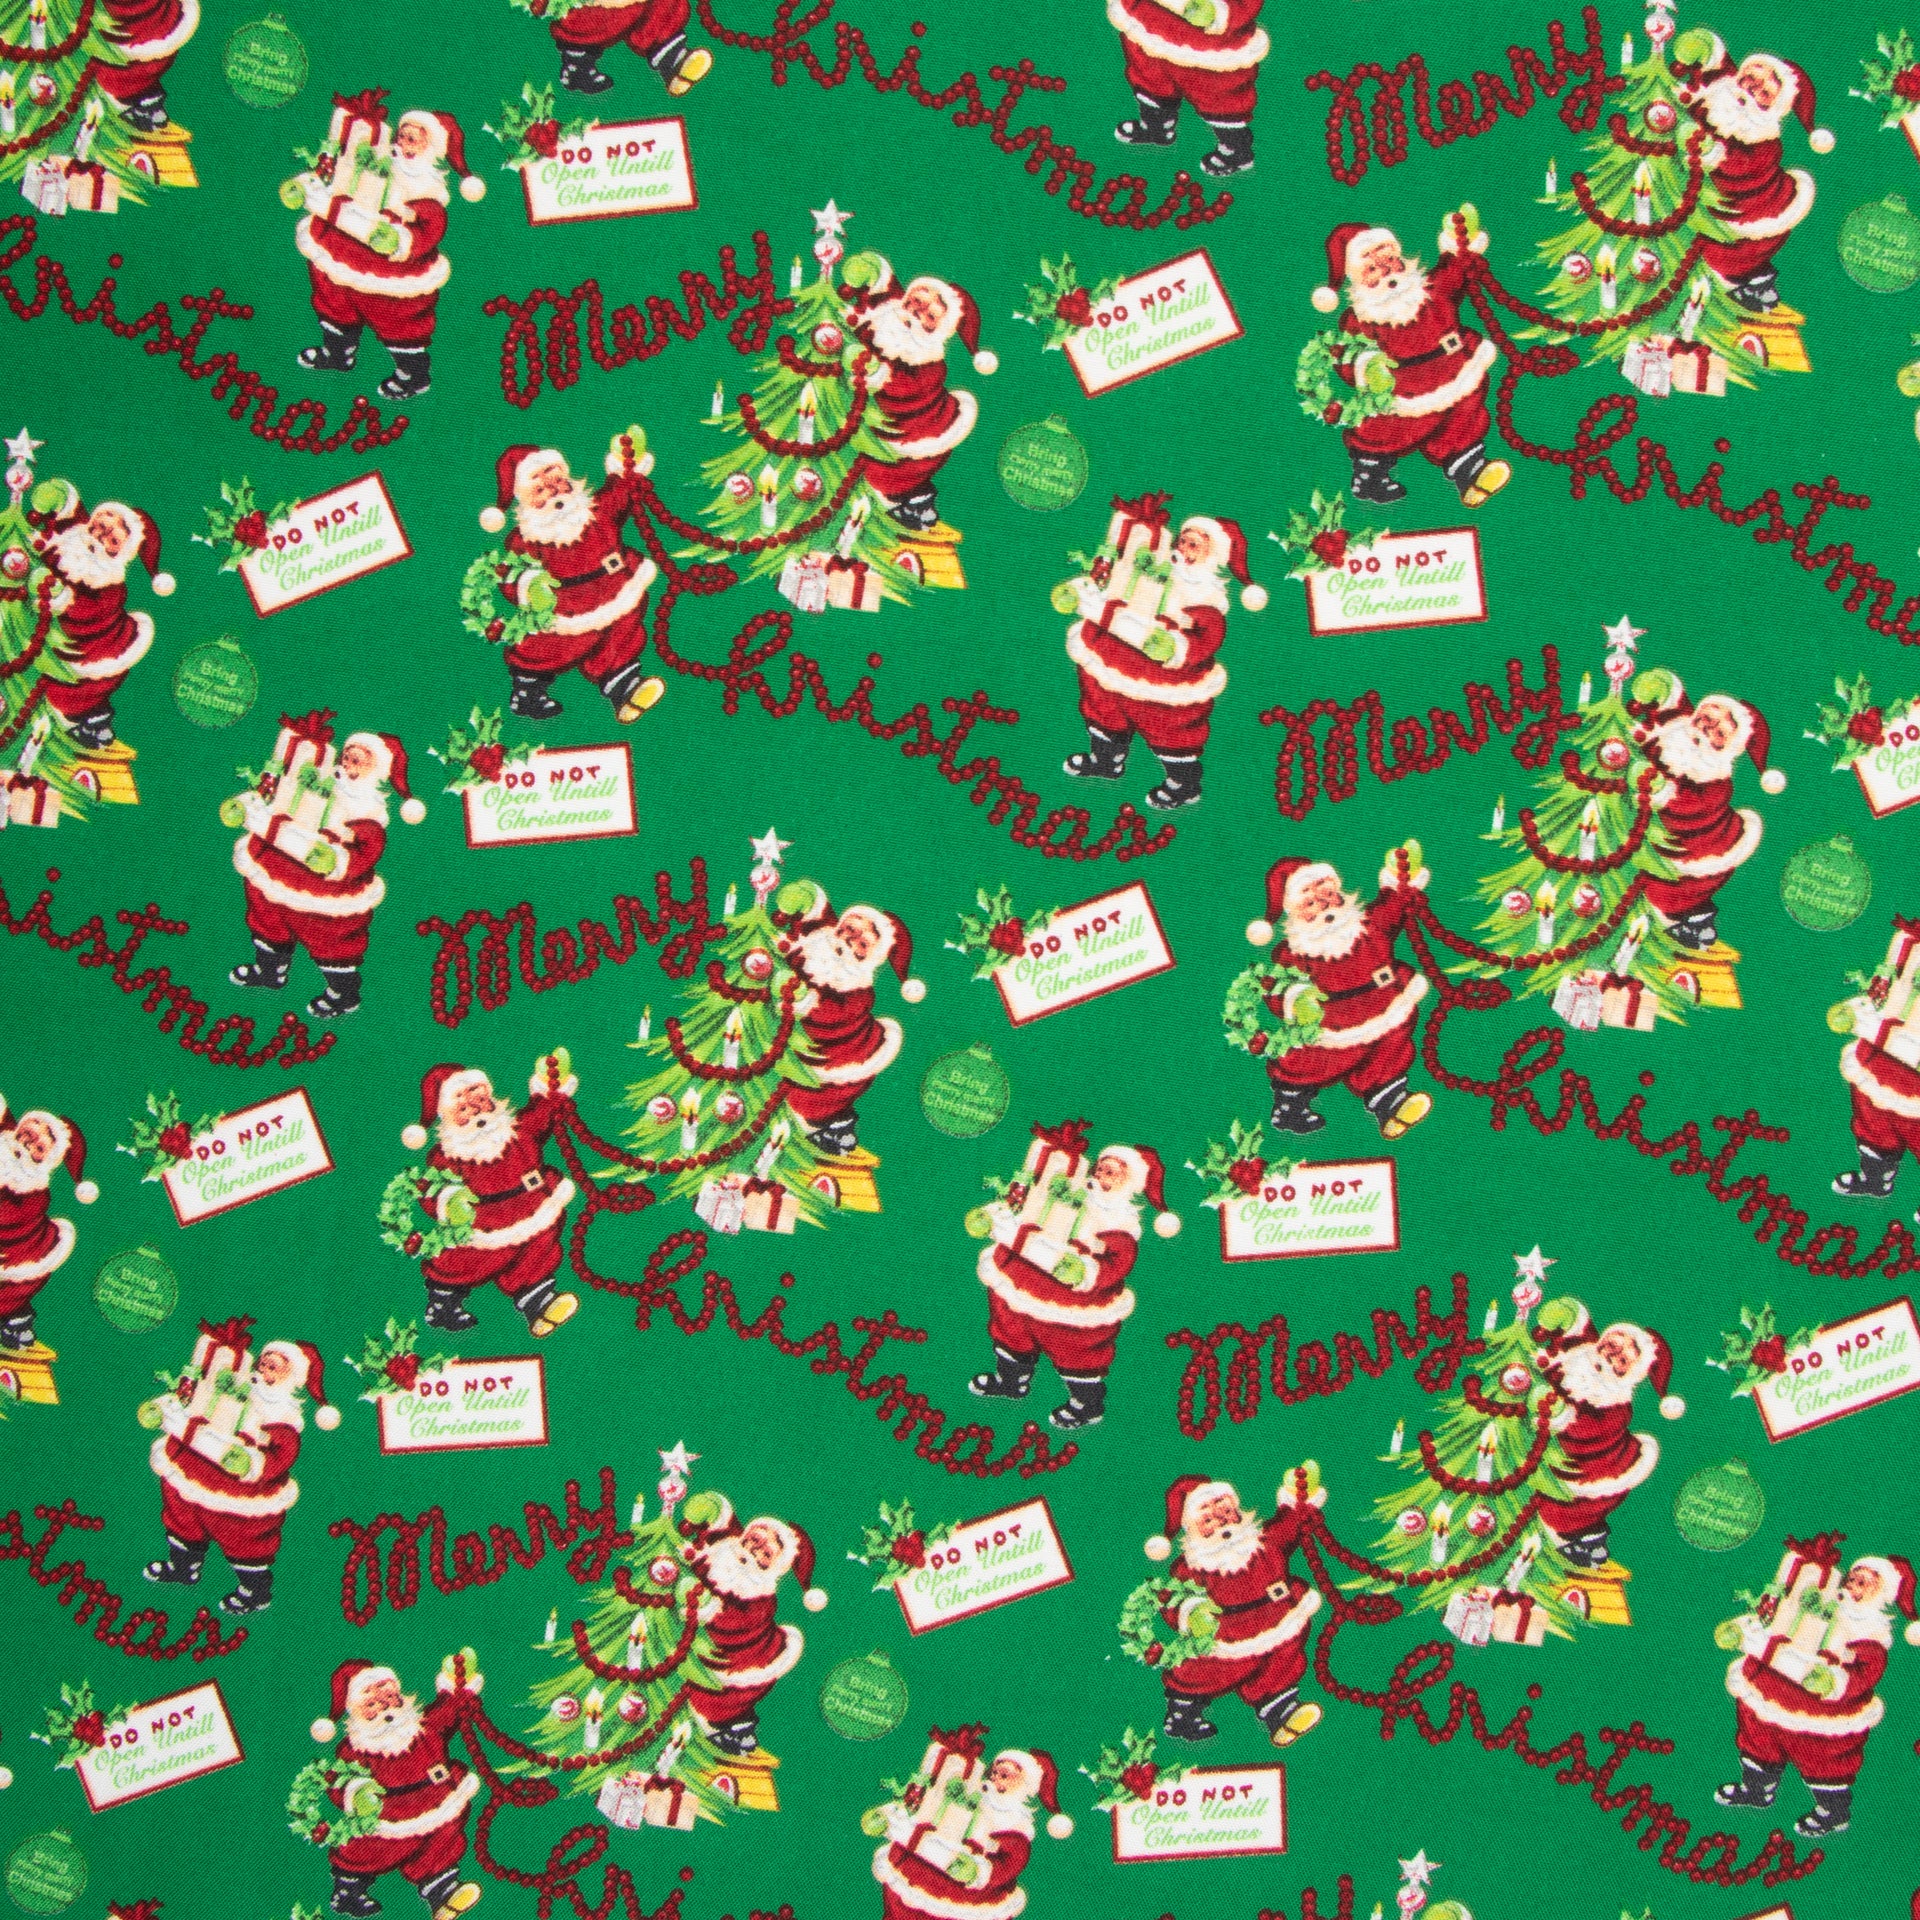 Fun Sewing Christmas Camouflage Fabric - Red Normal Print